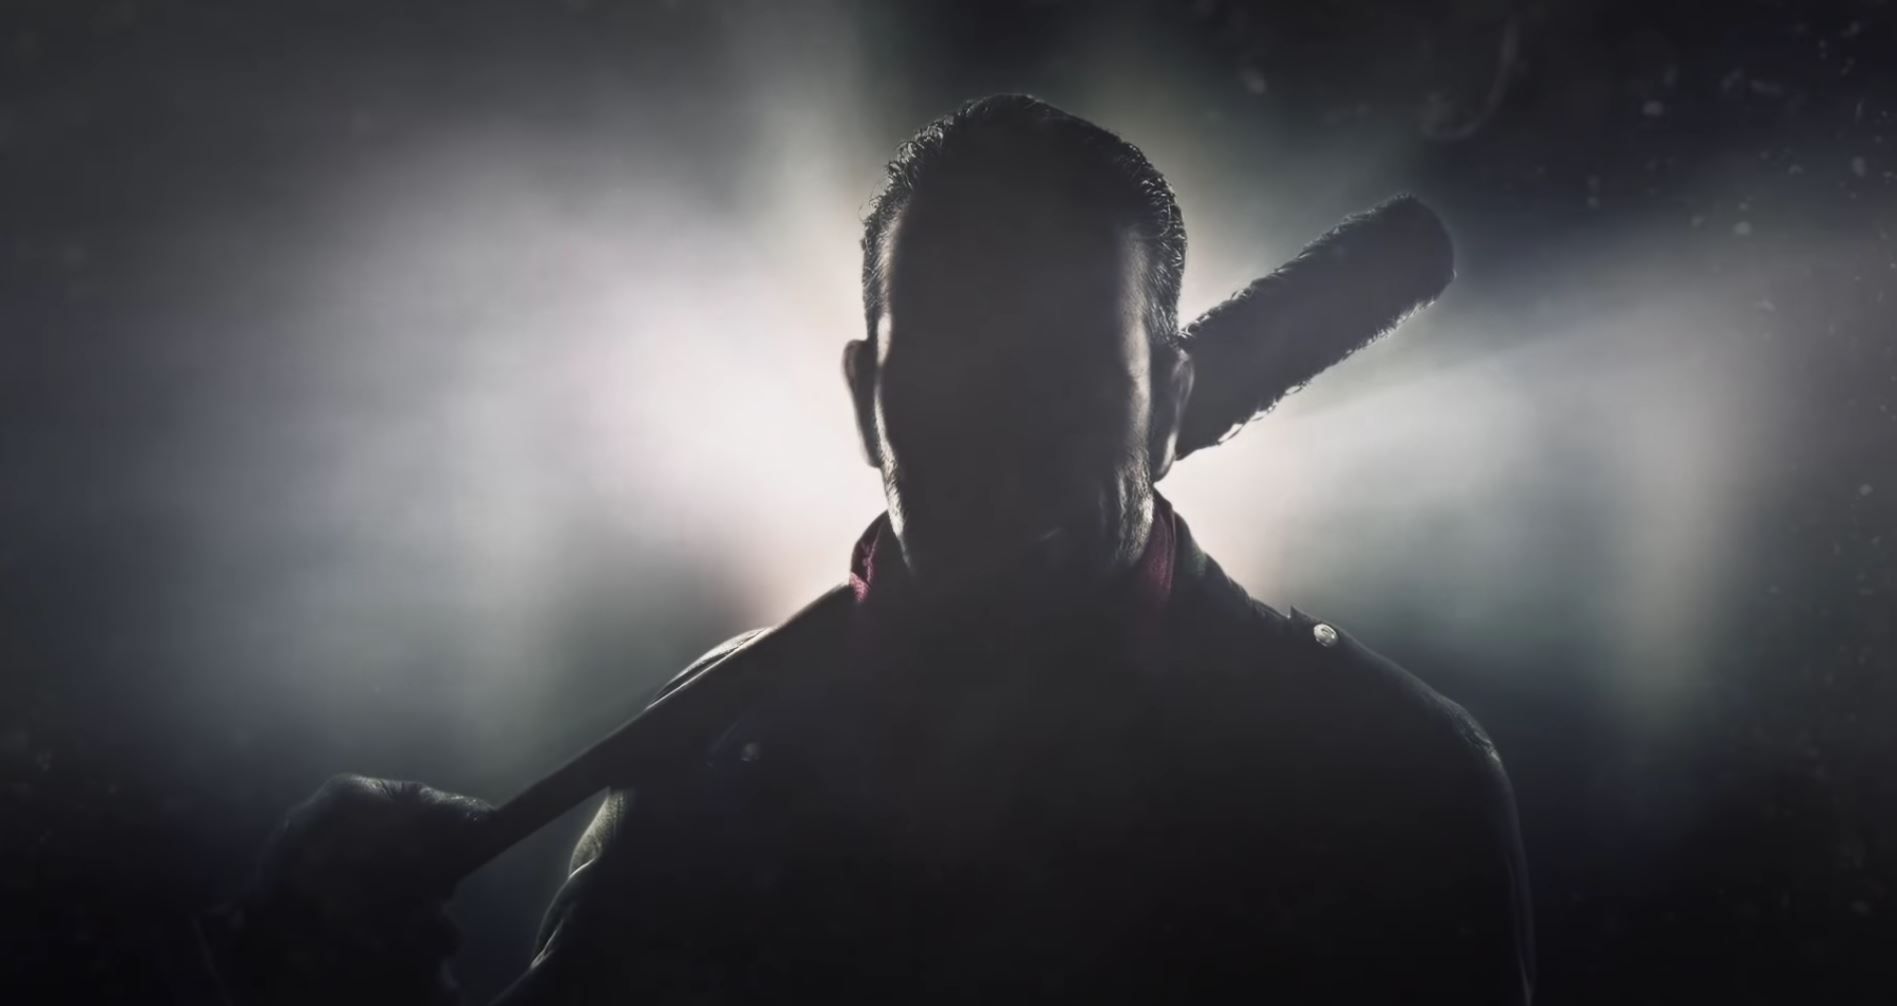 Tekken 7 Introduces New Returning Characters & Negan From The Walking Dead